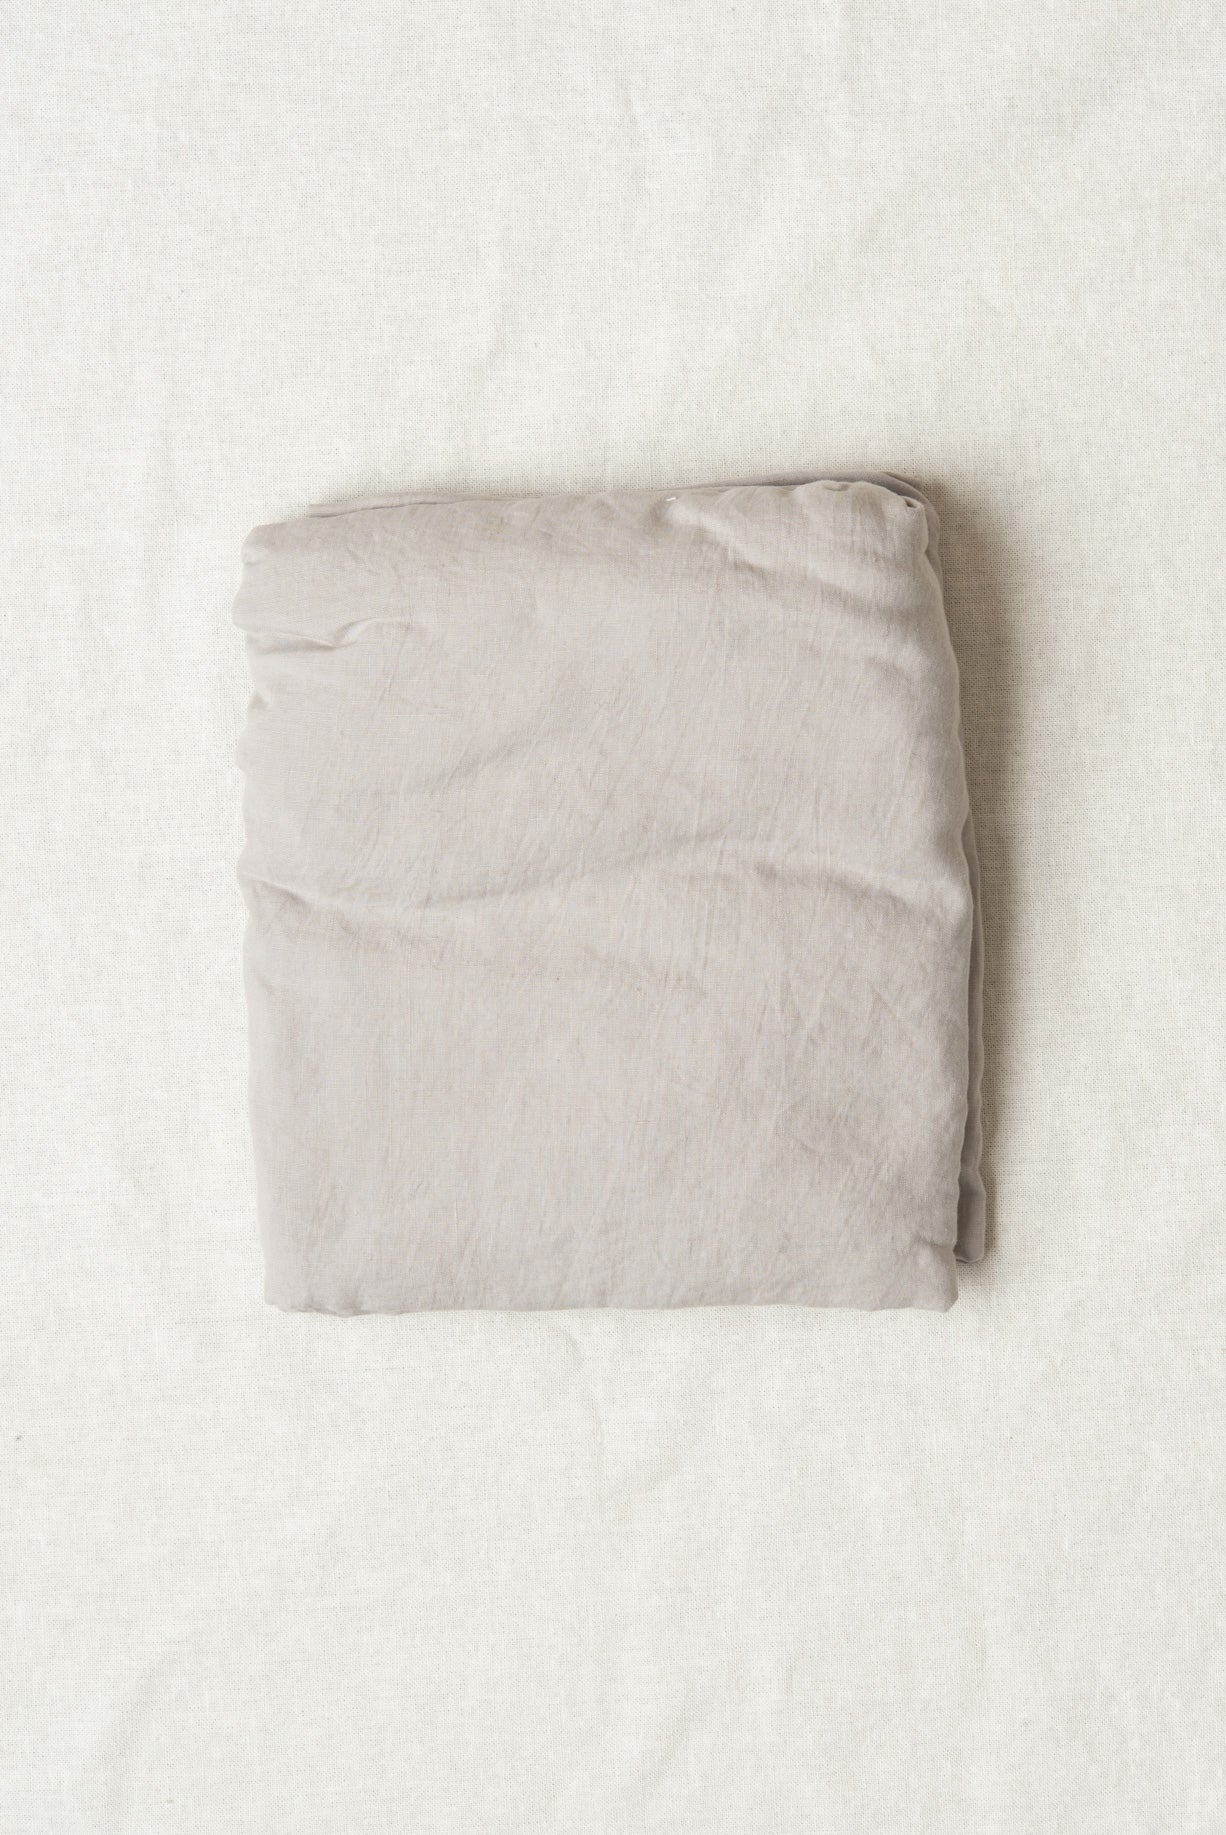 individual flat sheet in bed 